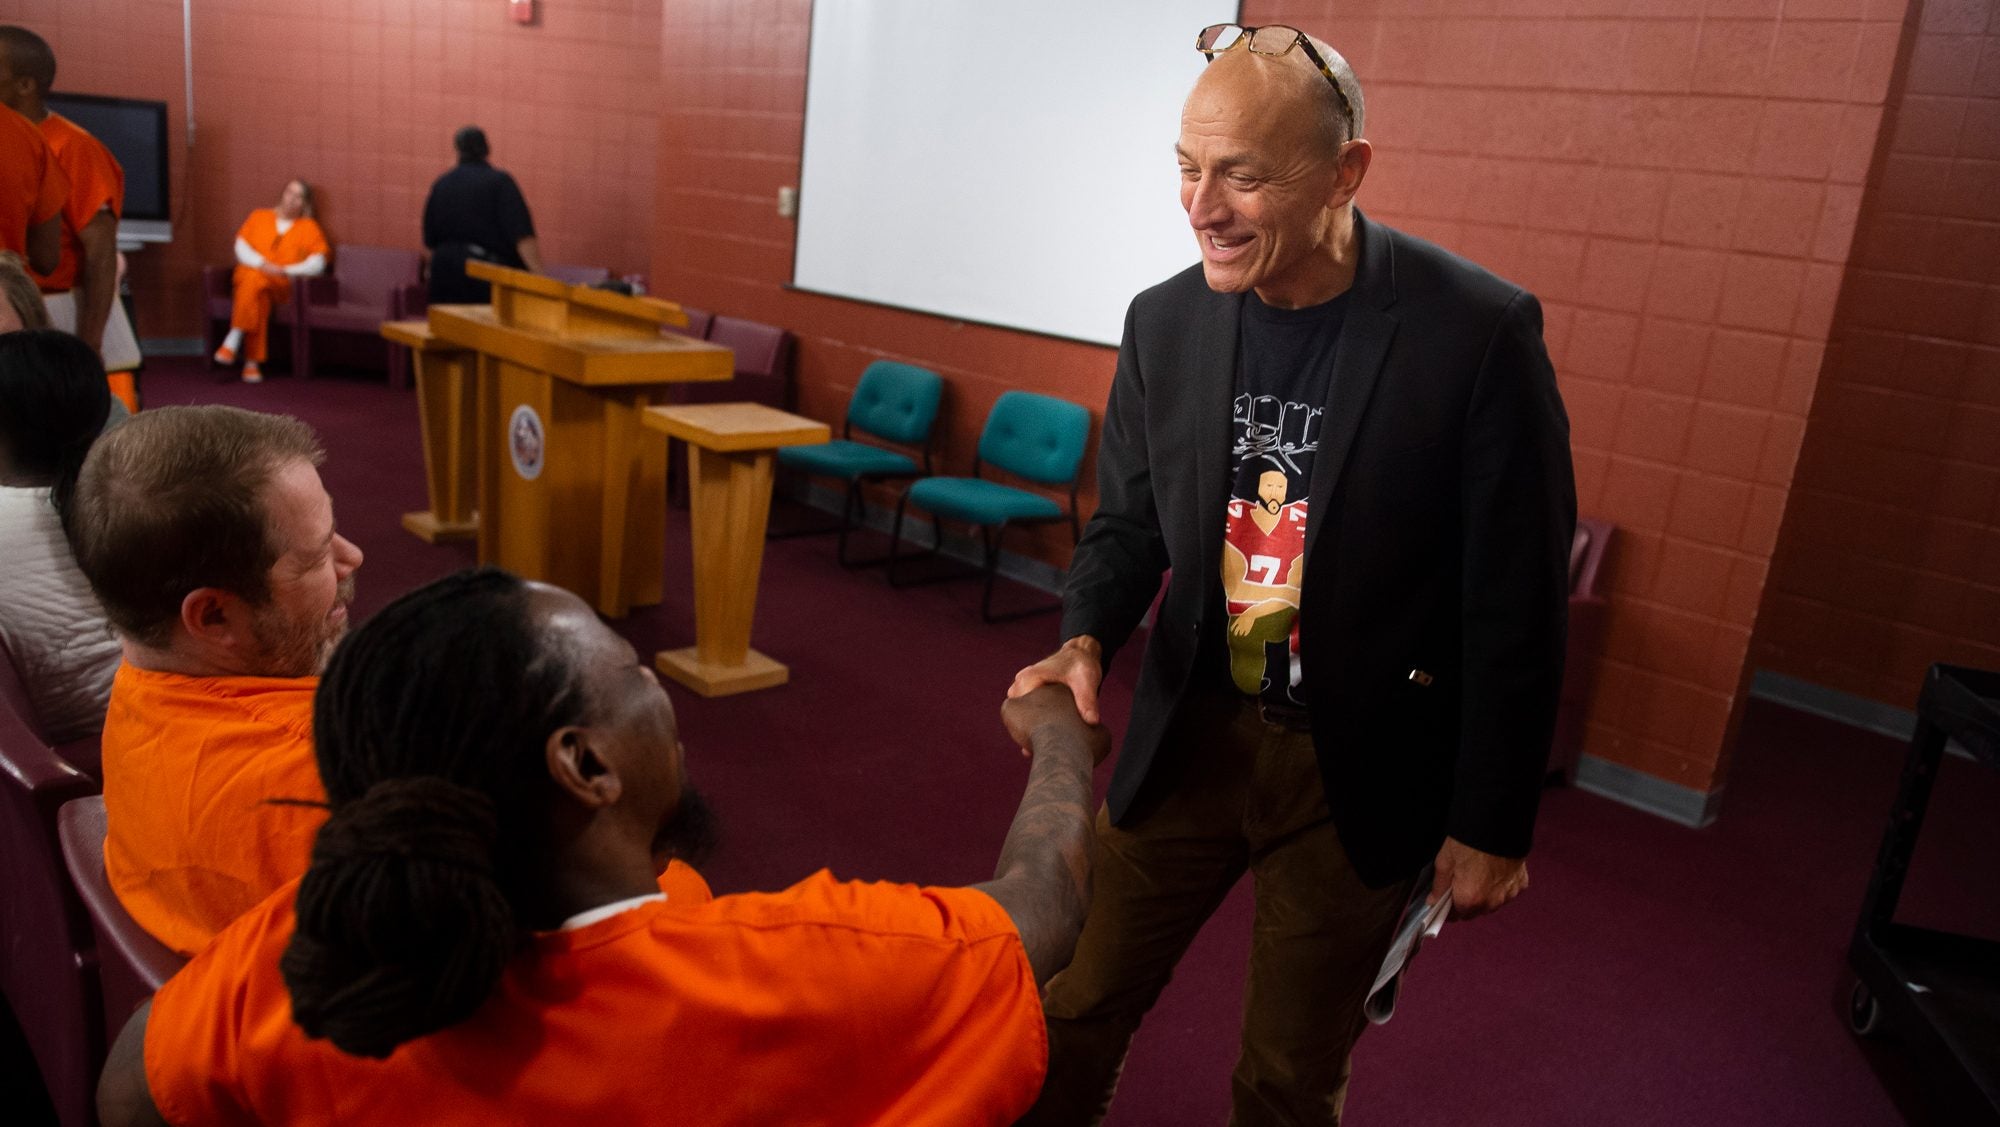 A professor shakes hands with an incarcerated student.